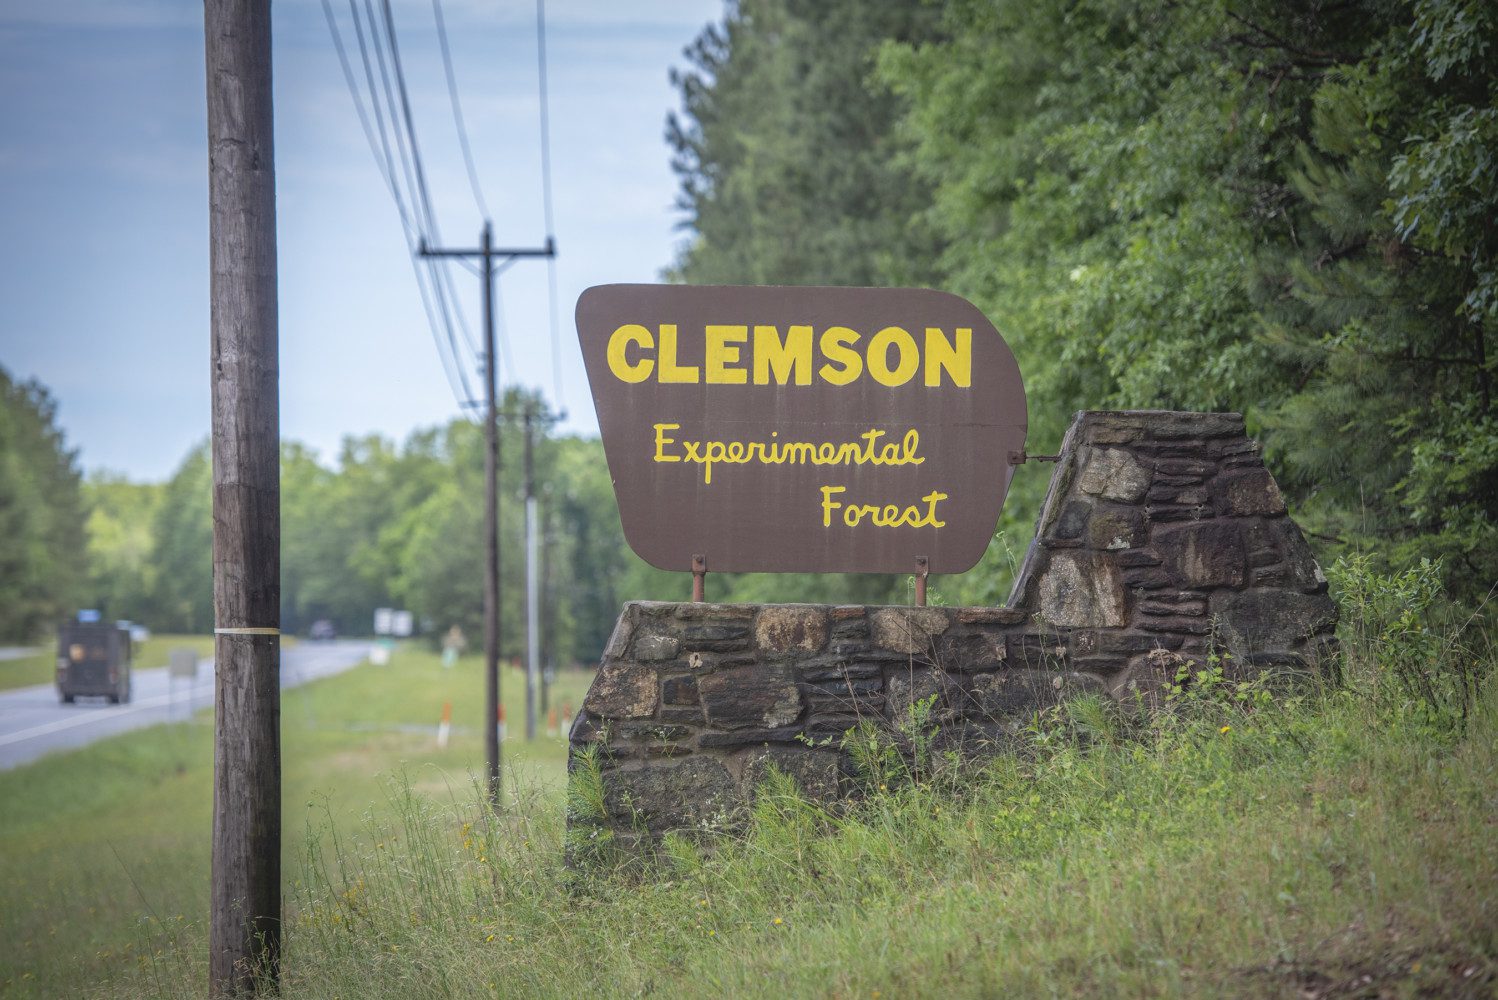 A sign that says "Clemson Experimental Forest" sits in the green grass by the side of a road.